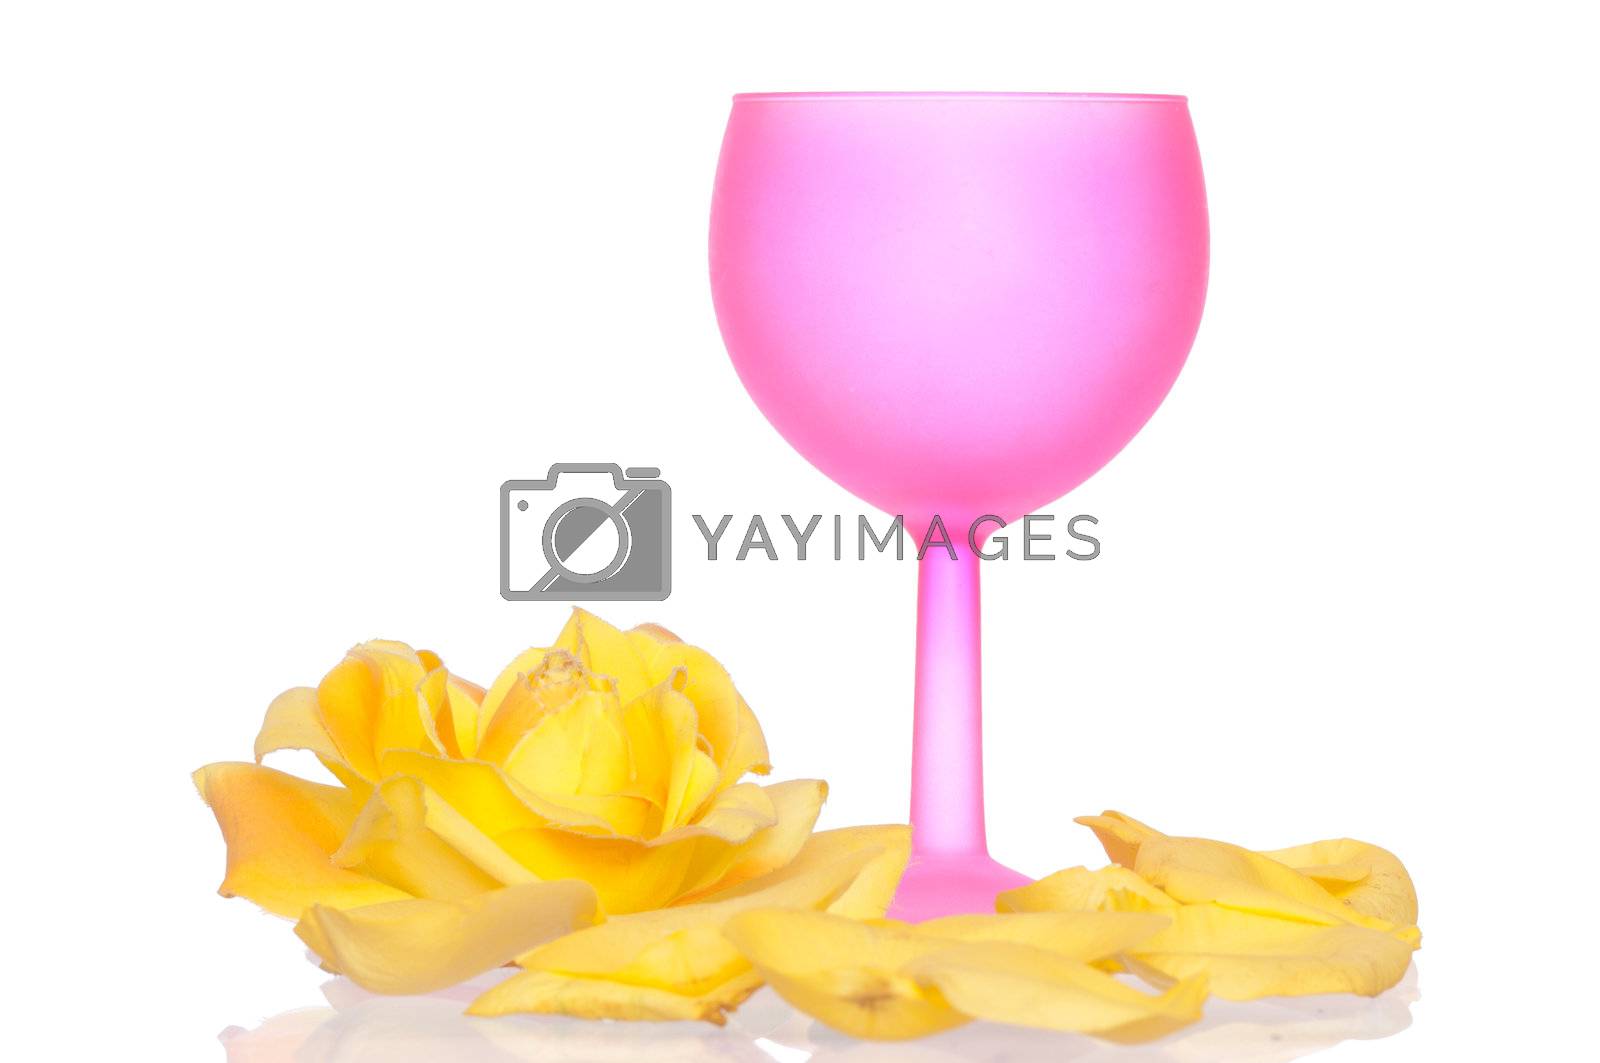 Royalty free image of wine goblet by merzavka